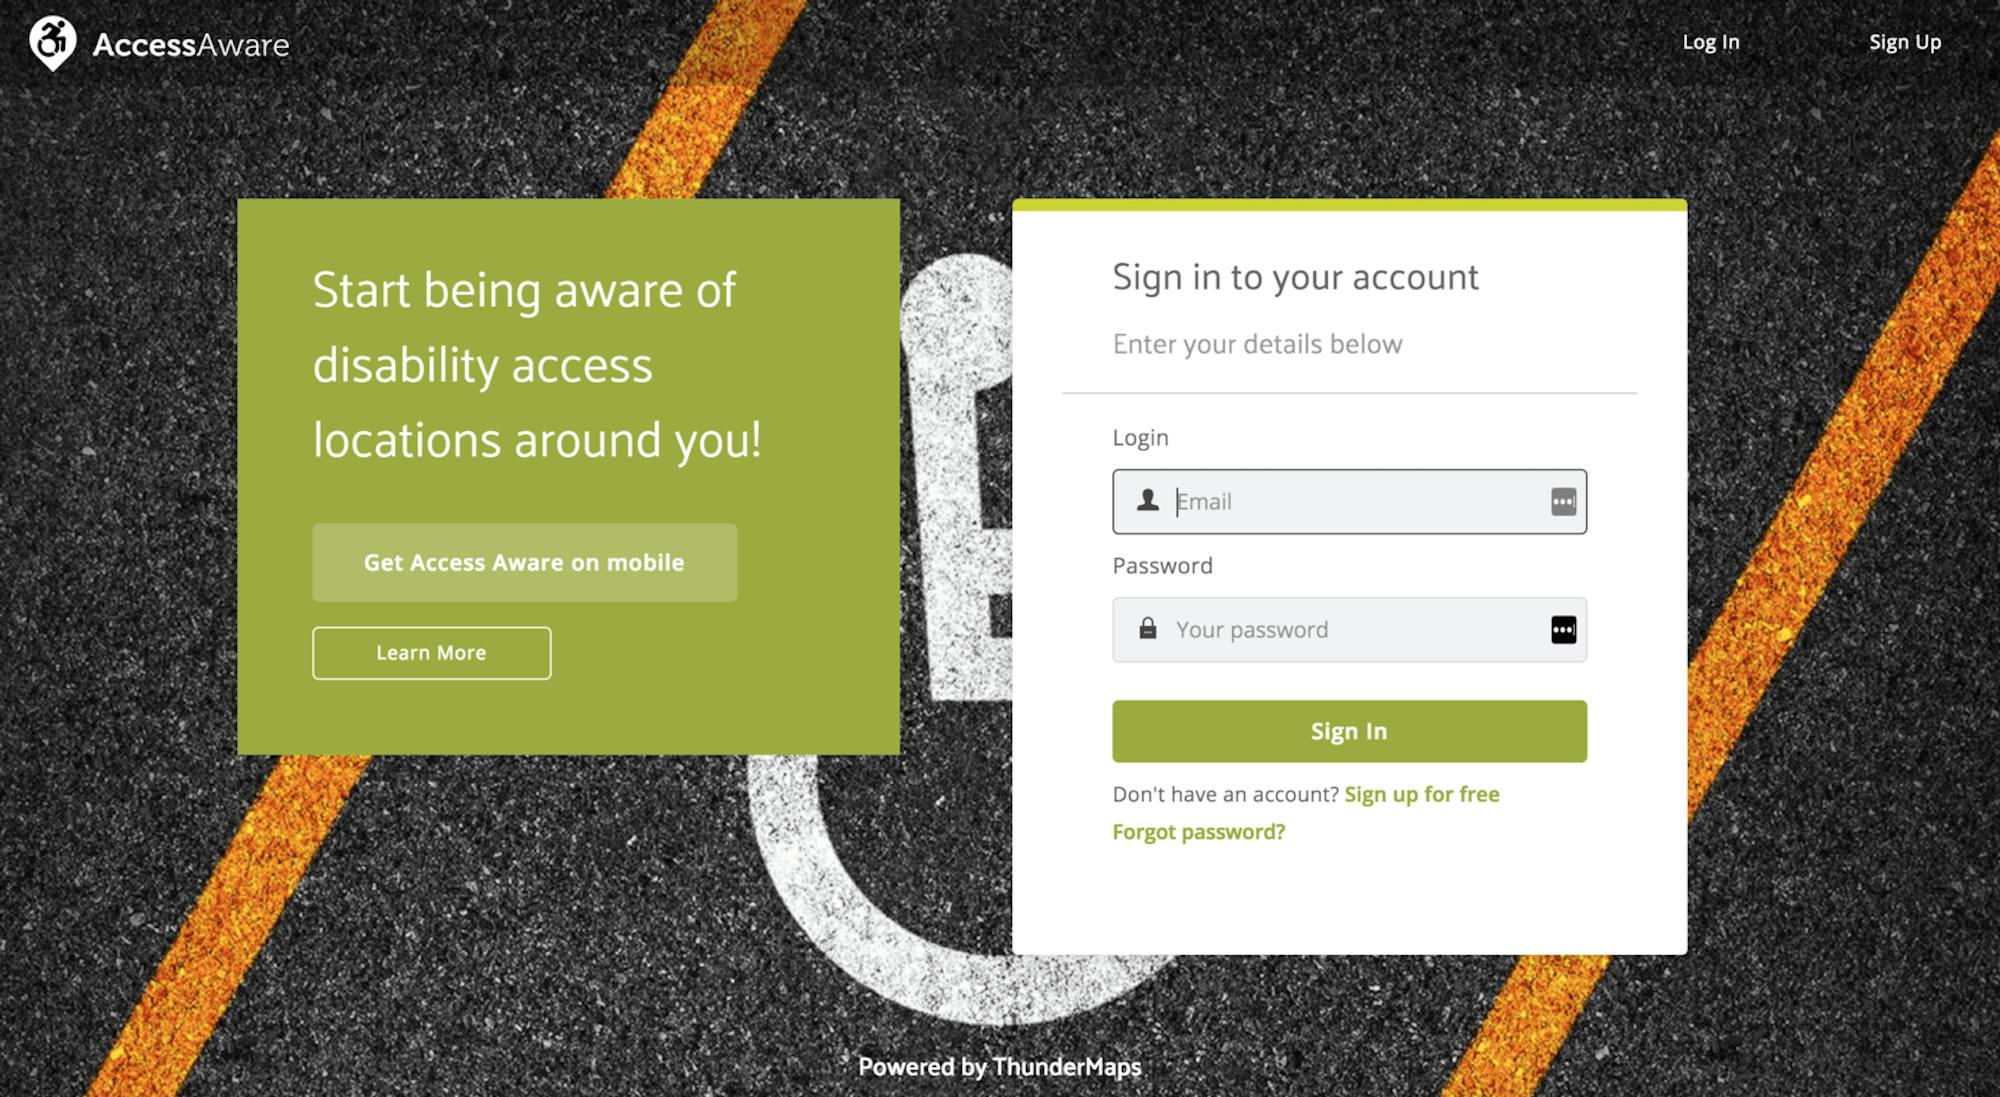 Harnessing location reporting technology for mobility parking &#8211; the Access Aware app